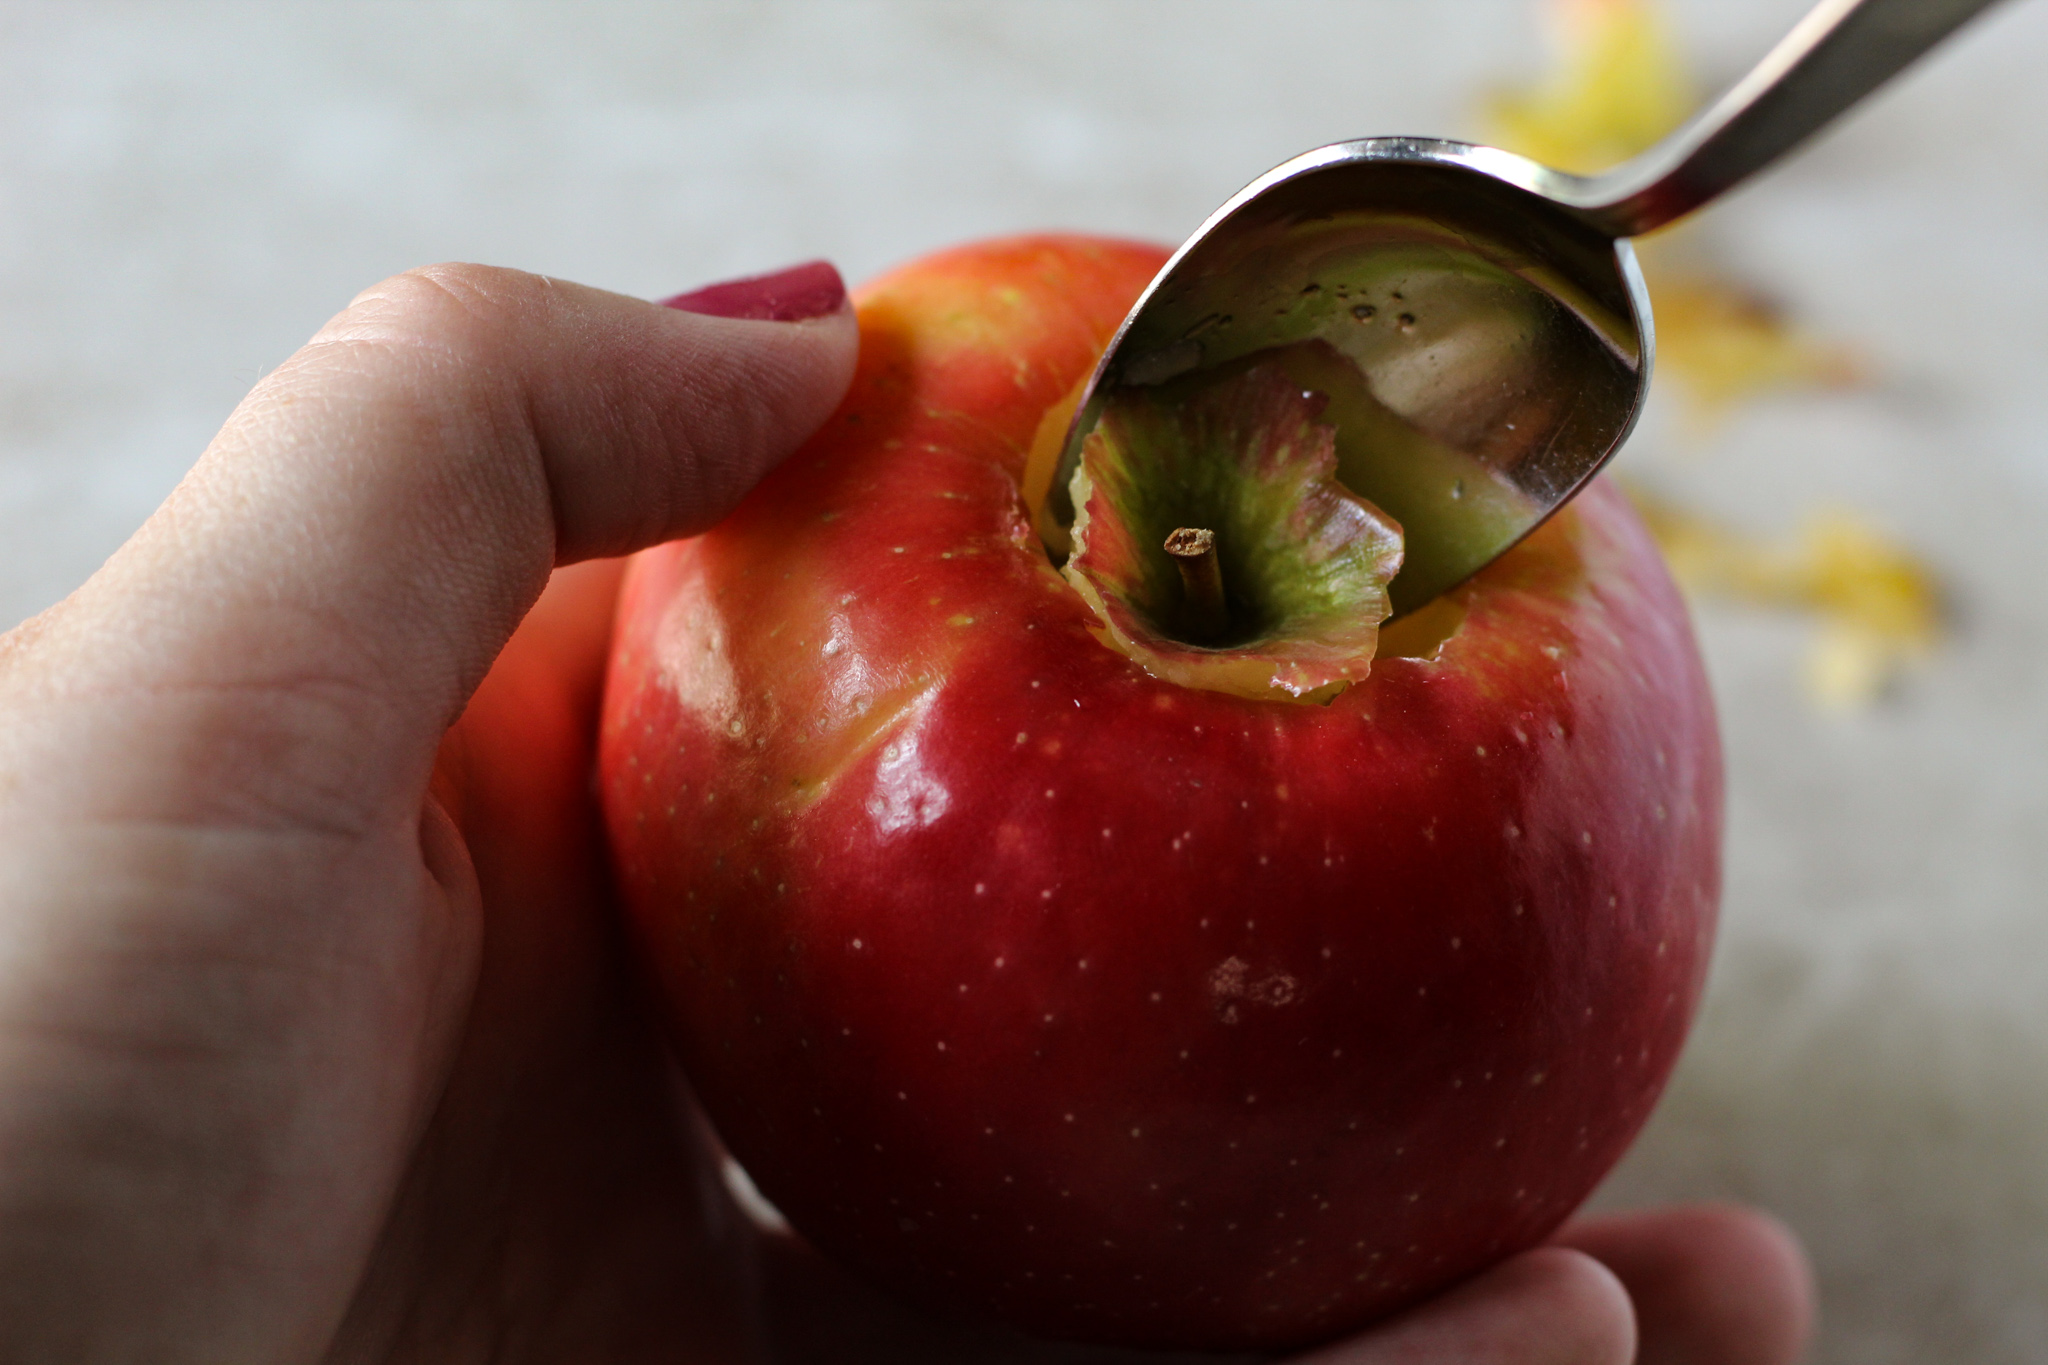 Removing apple core and seeds with a spoon